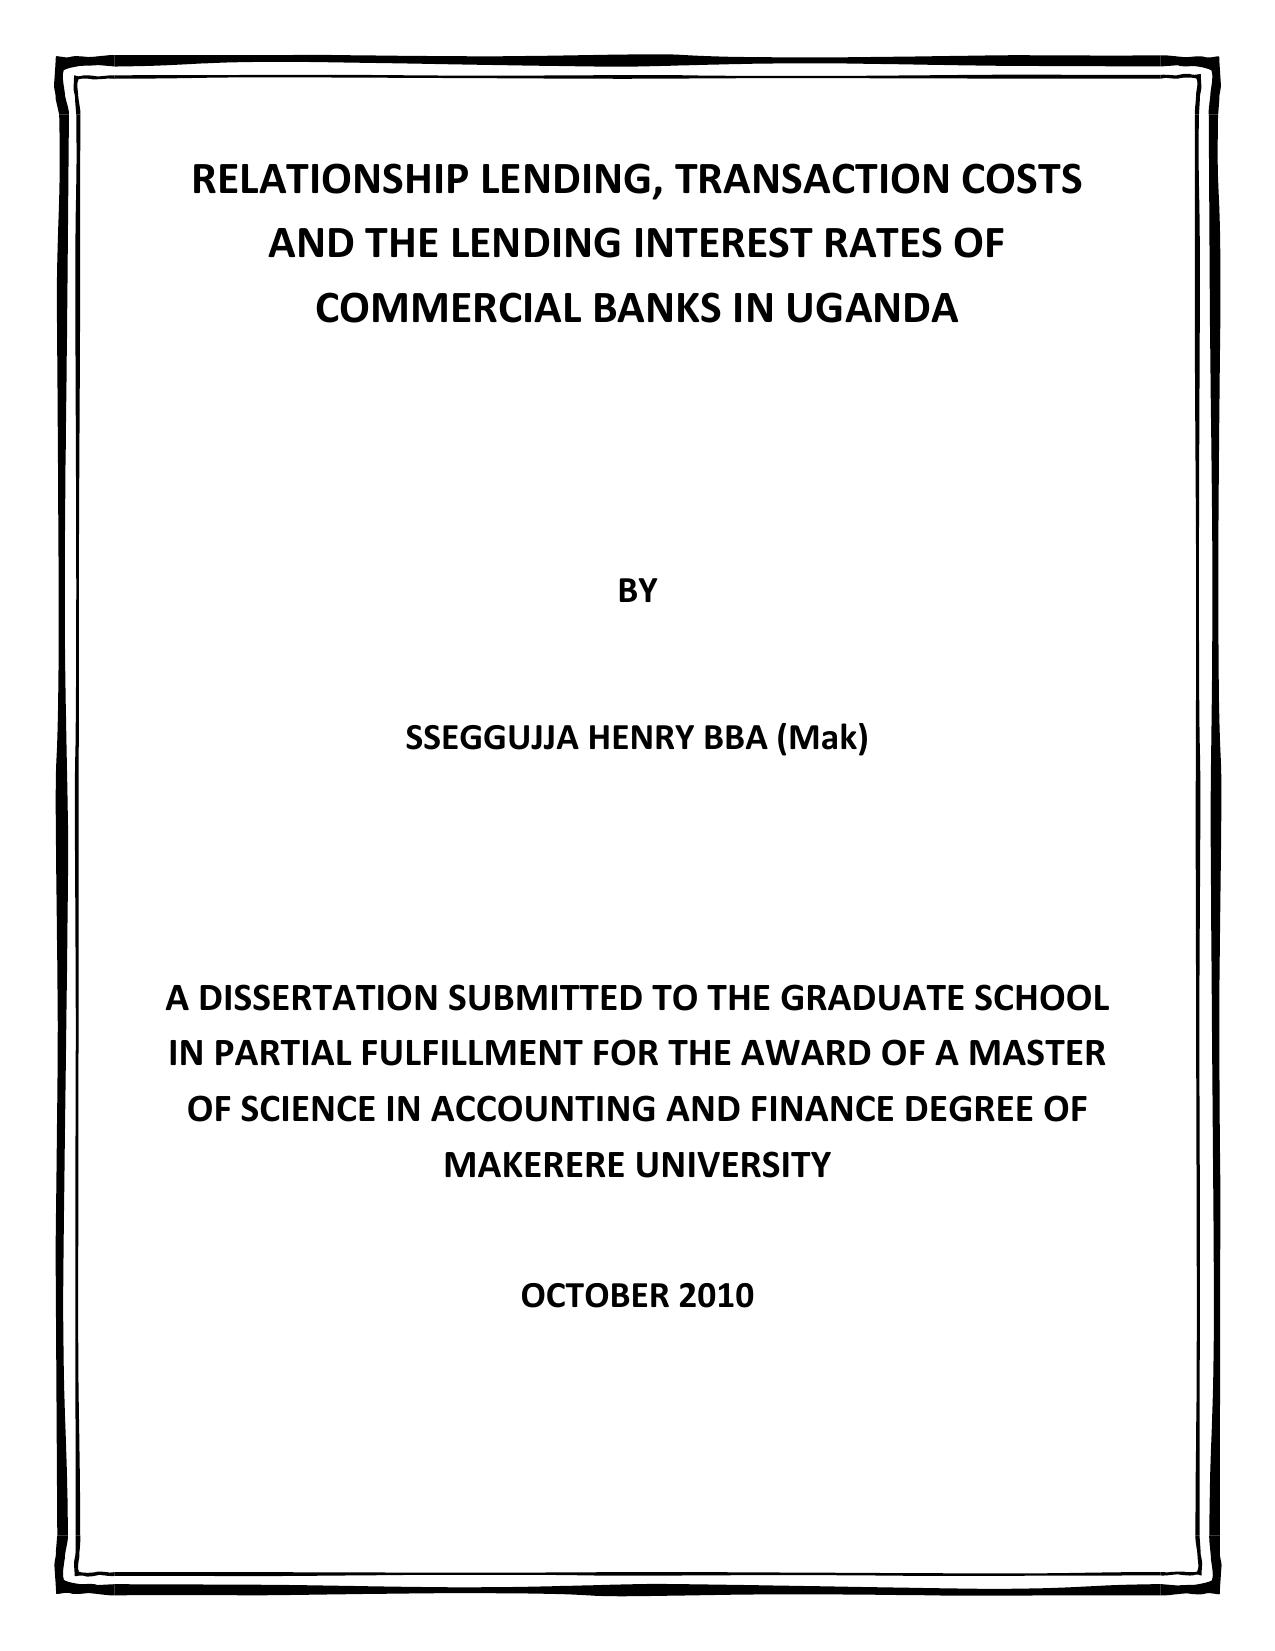 RELATIONSHIP LENDING, TRANSACTION COSTS AND THE LENDING INTEREST RATES OF COMMERCIAL BANKS IN UGANDA